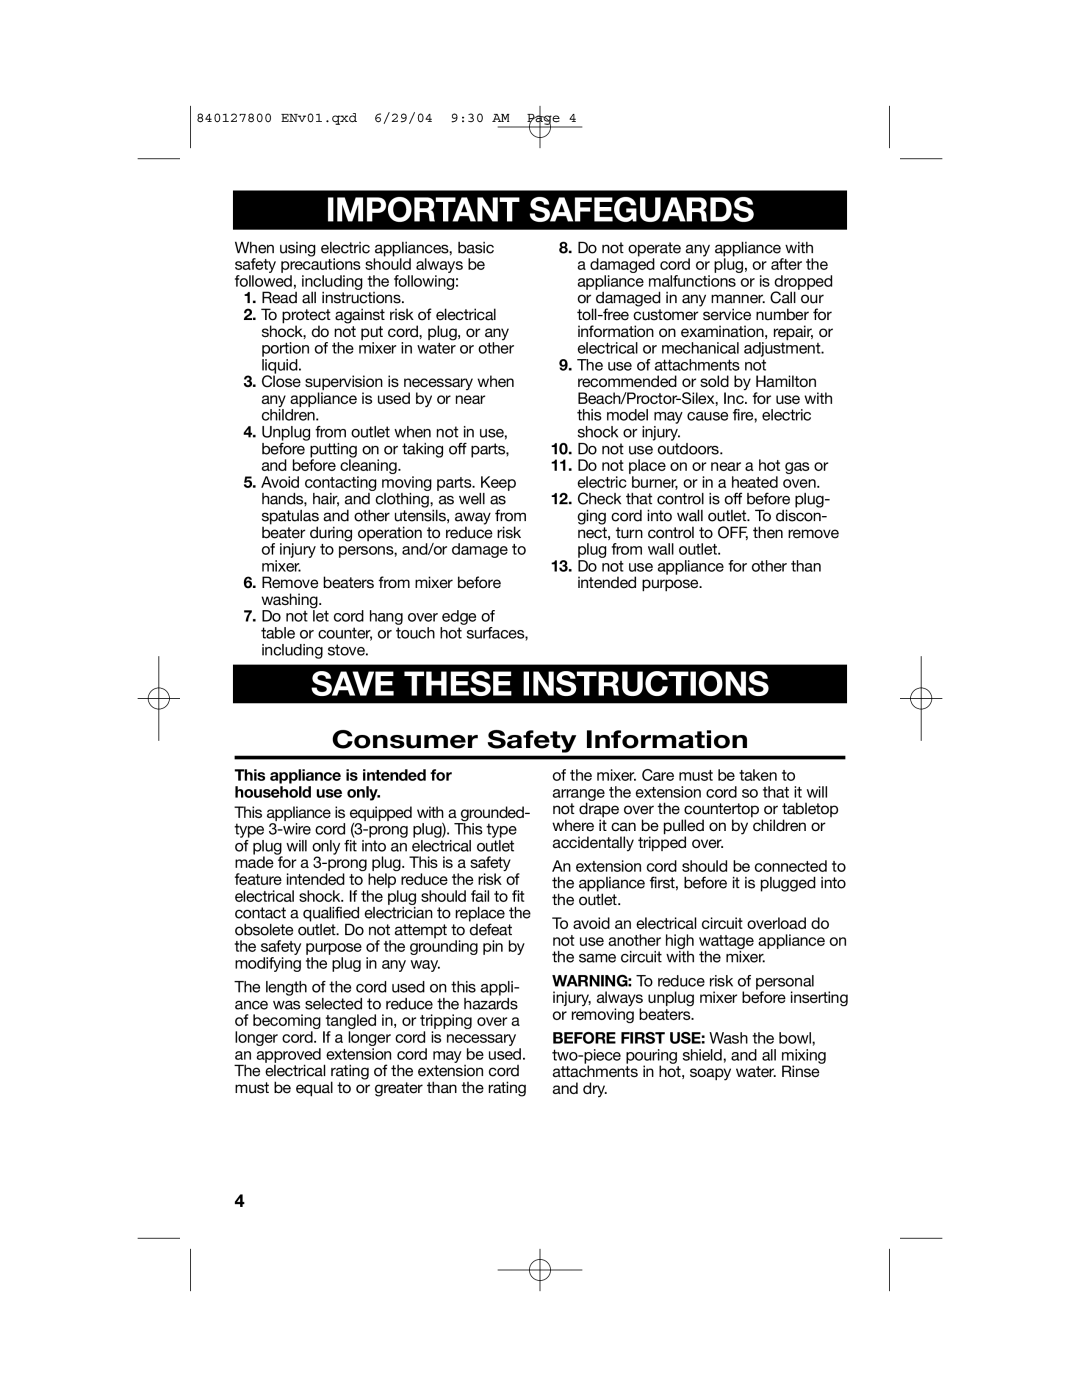 Hamilton Beach 63225 manual Consumer Safety Information, Important Safeguards, Save These Instructions 